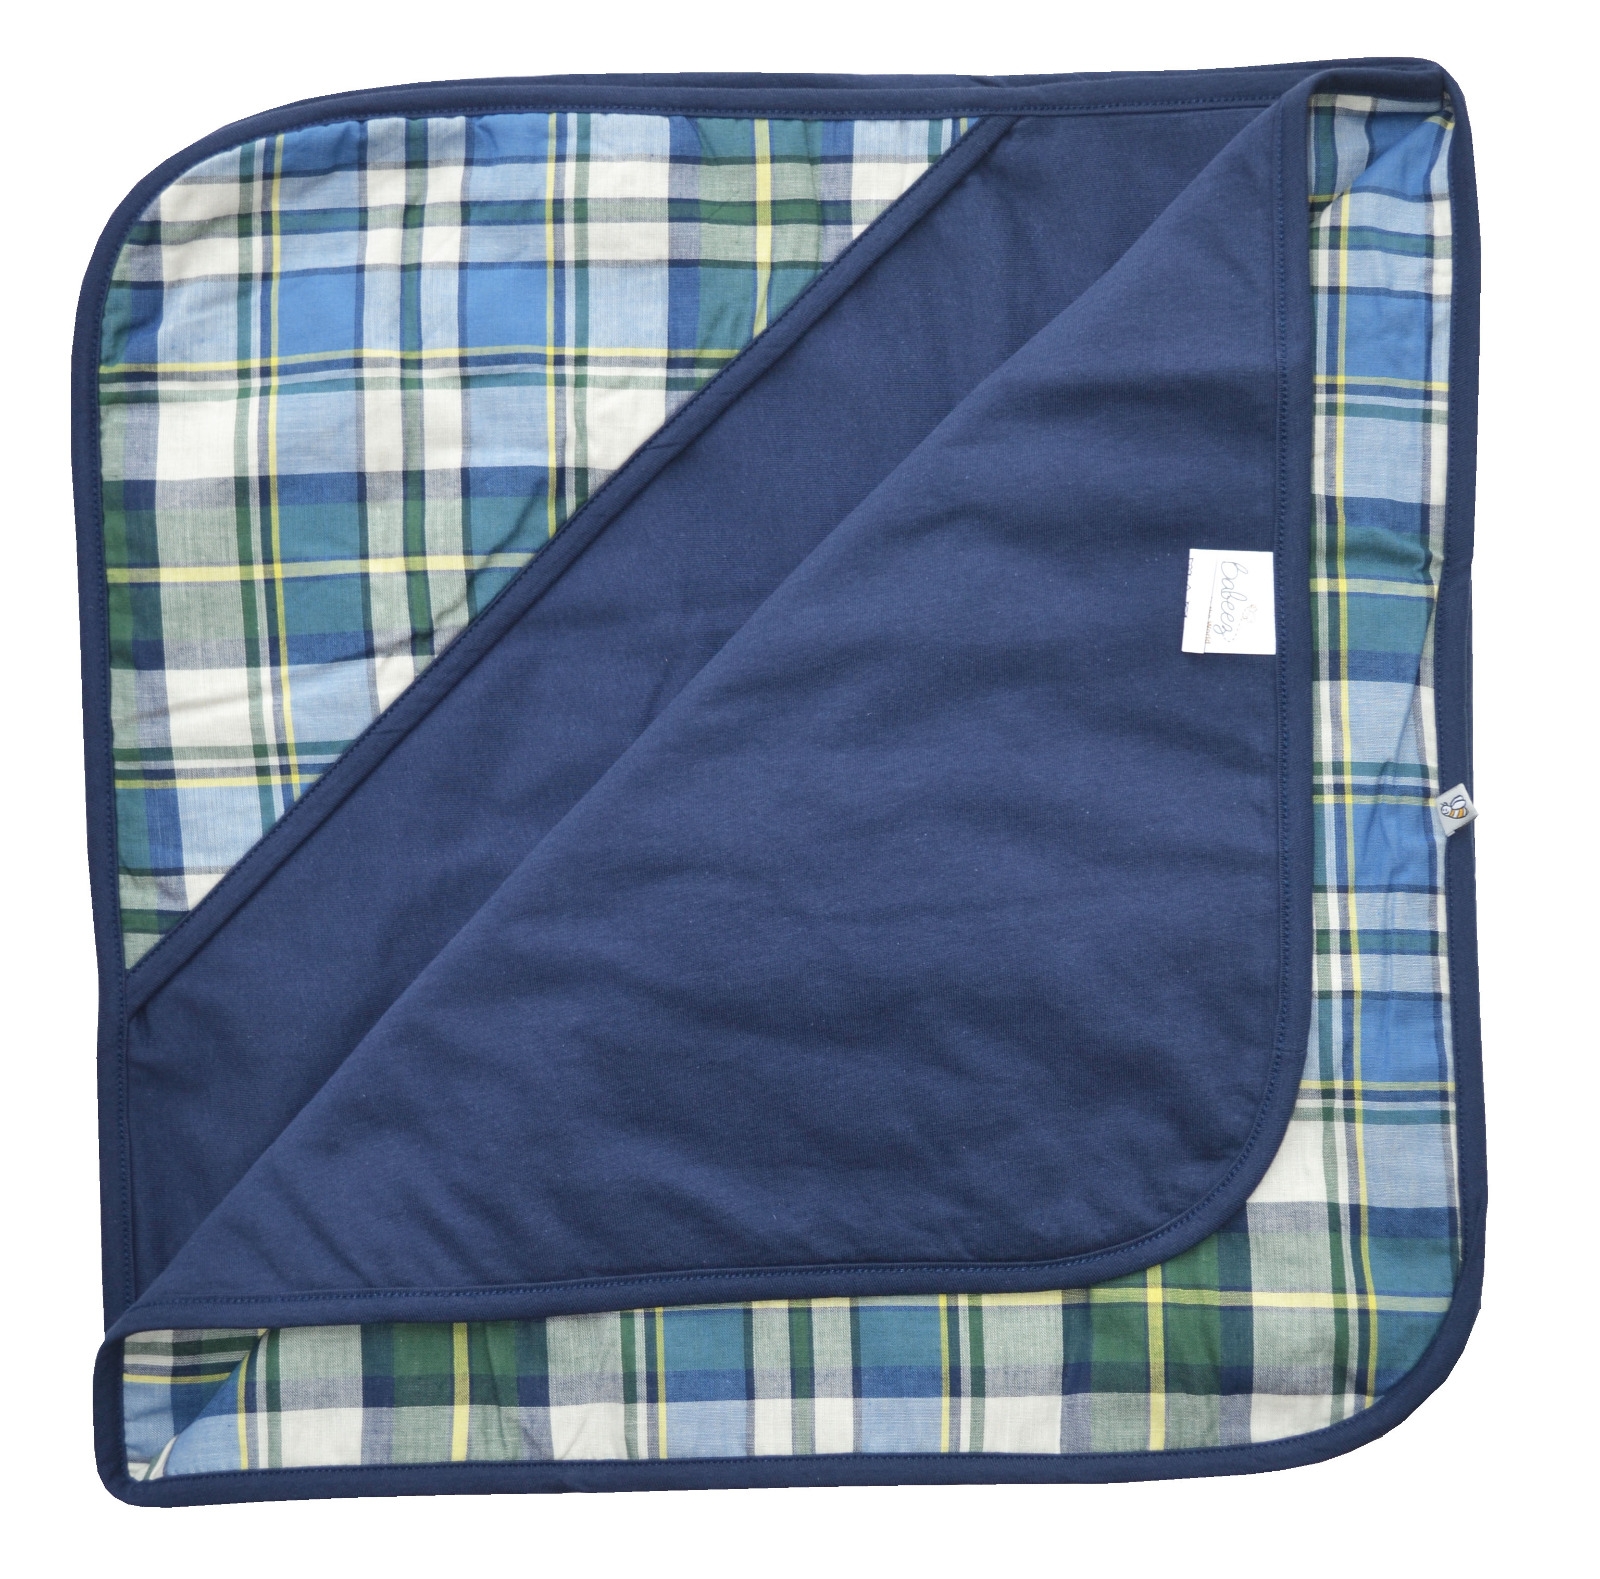 Blue Checks/Navy Quilt with Hoody (Woven & Cotton)